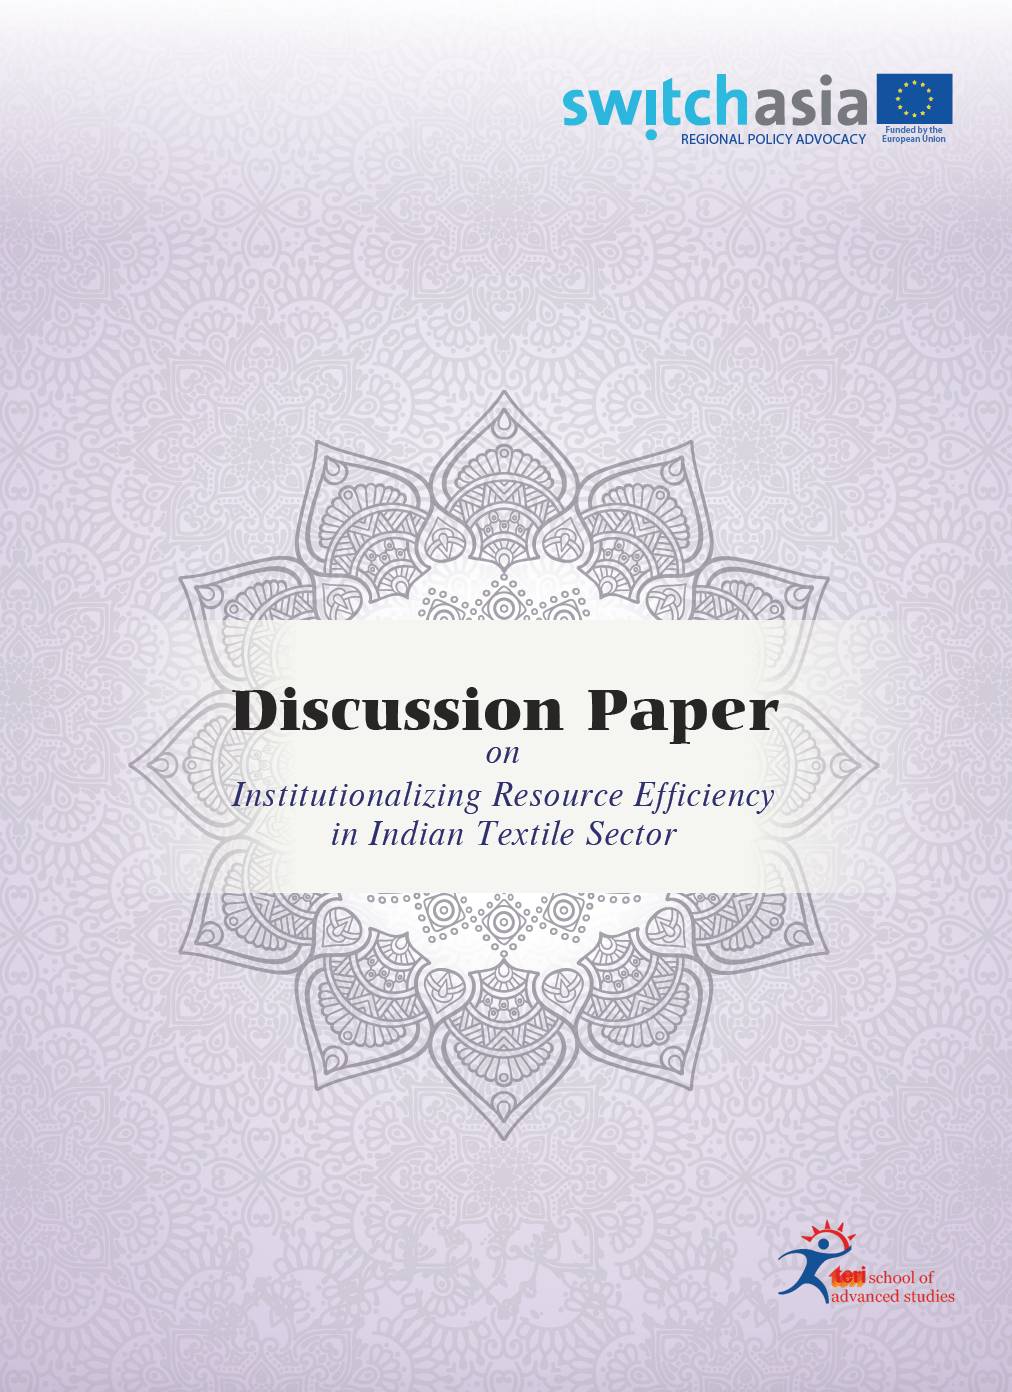 Discussion Paper on Institutionalising Resource Efficiency in the Indian Textile Sector